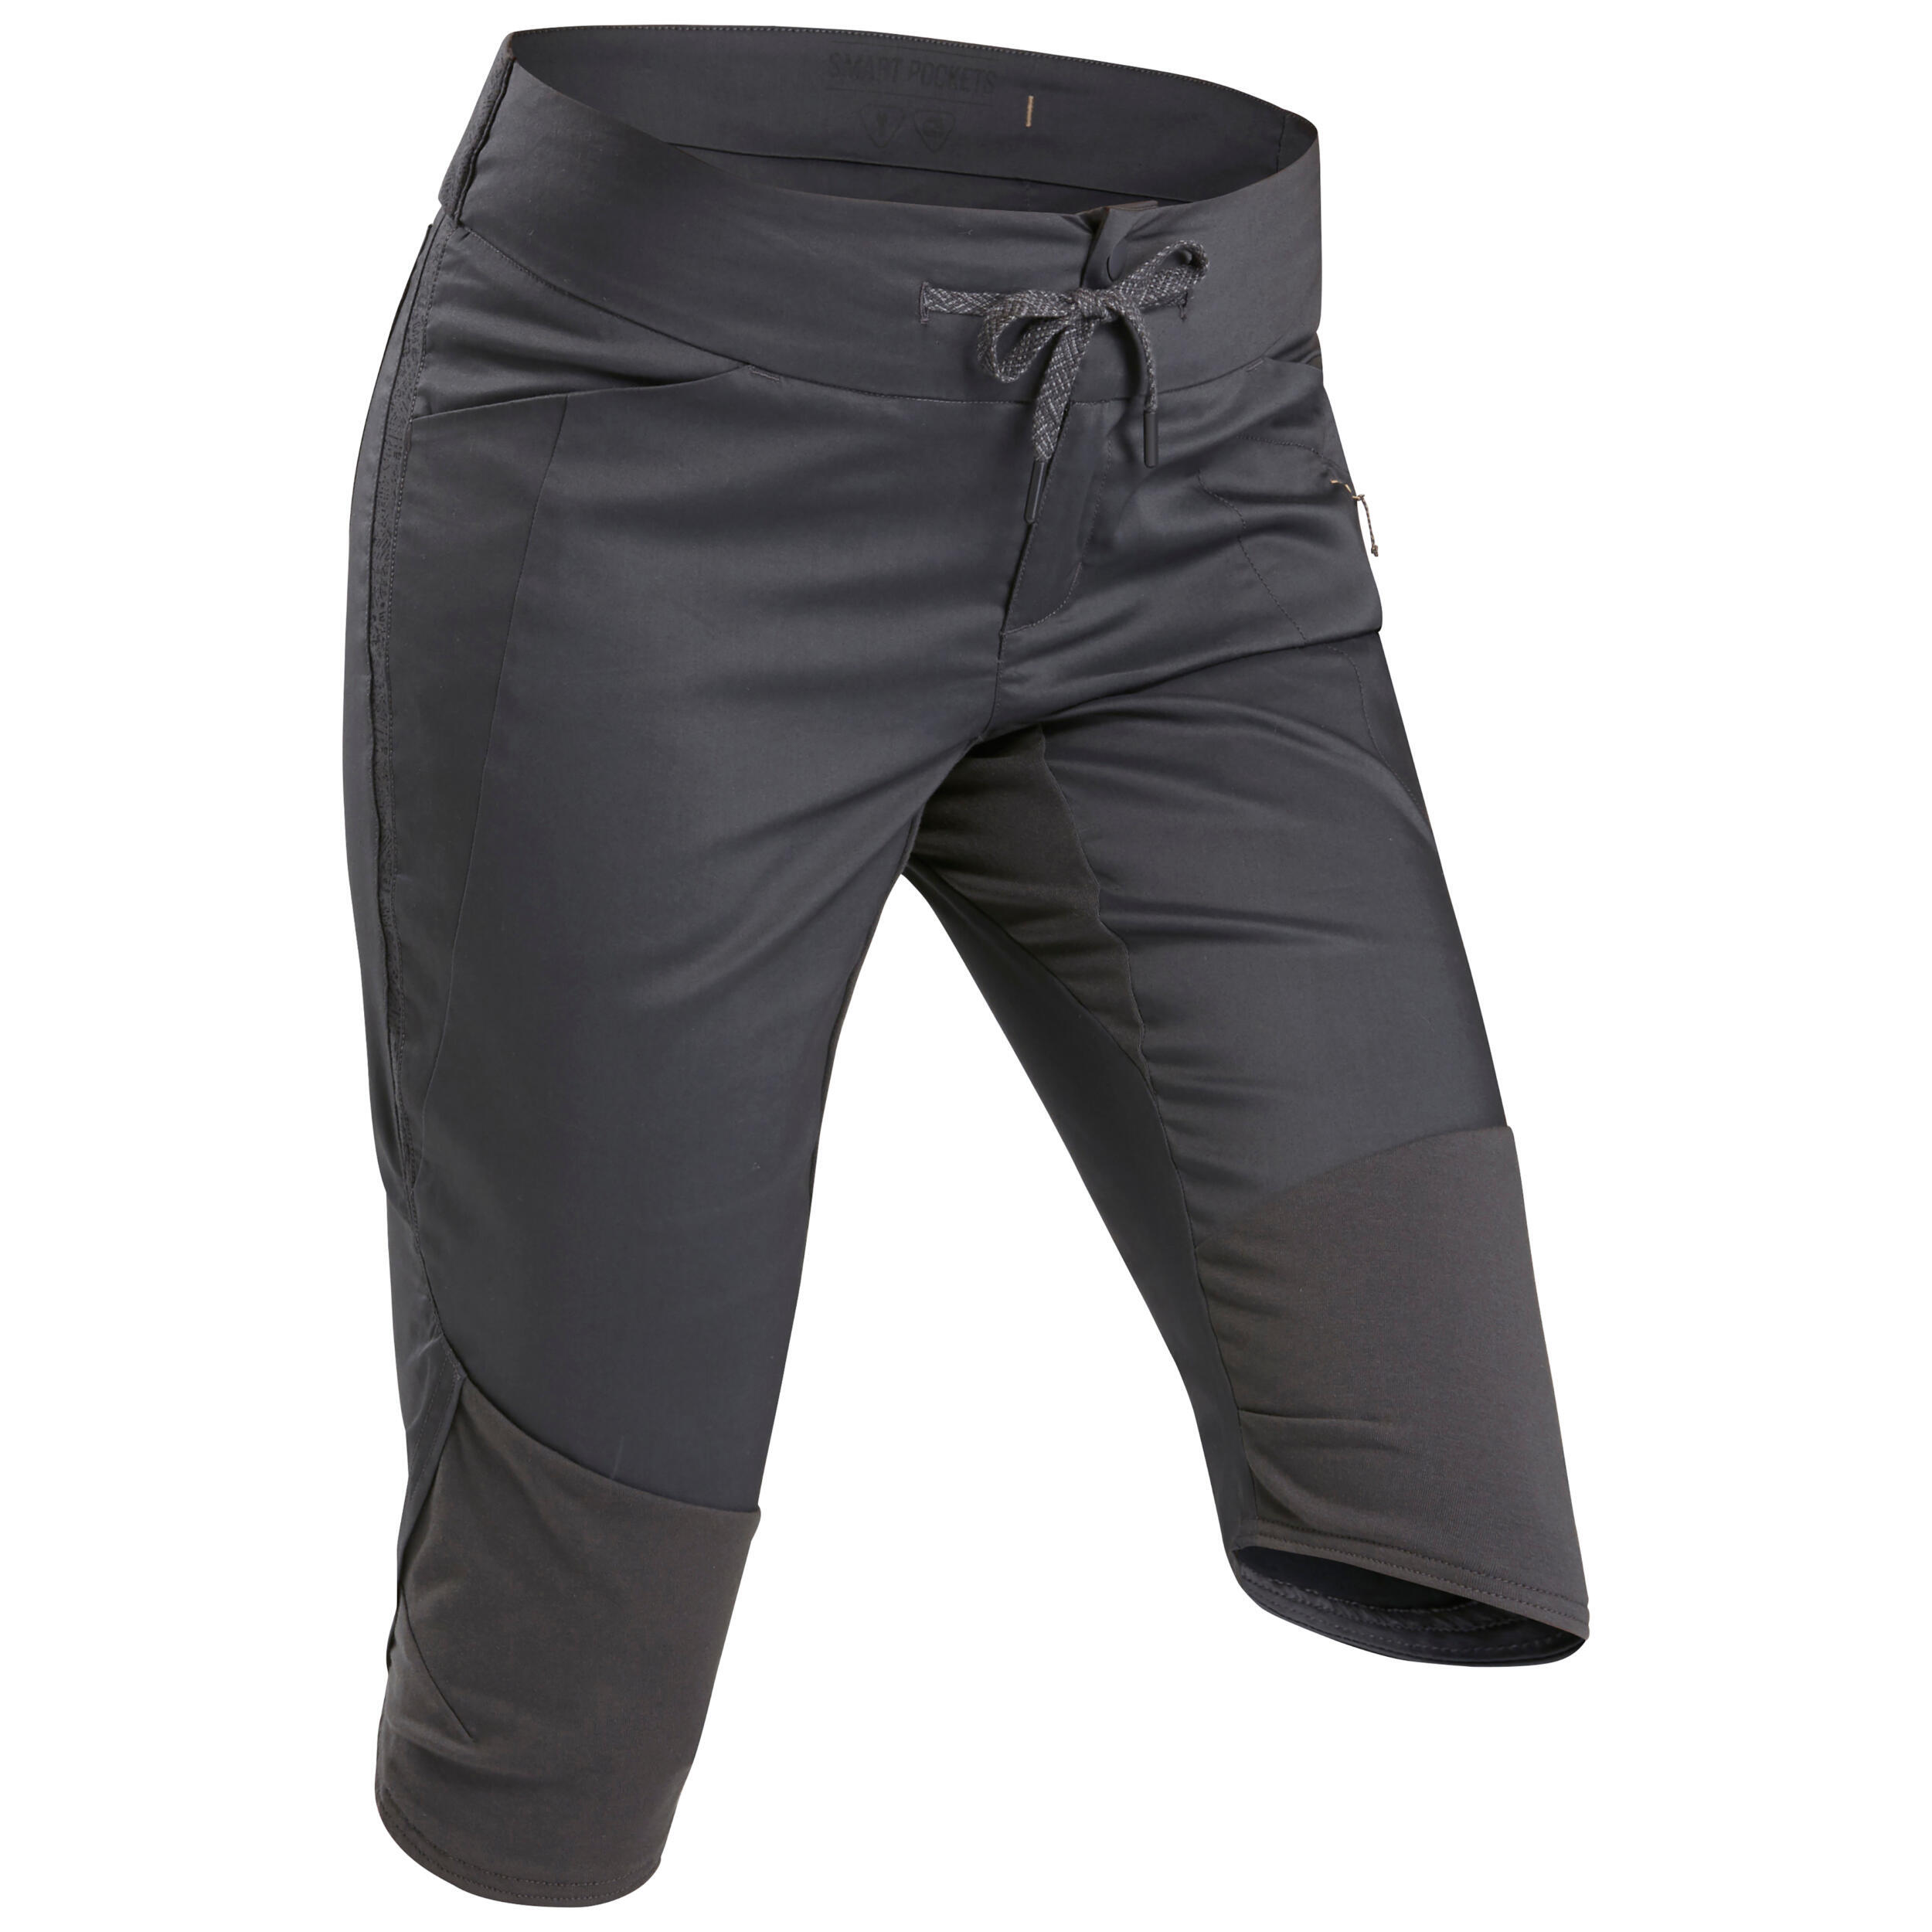 Women's Cropped Hiking Trousers - NH500 1/10